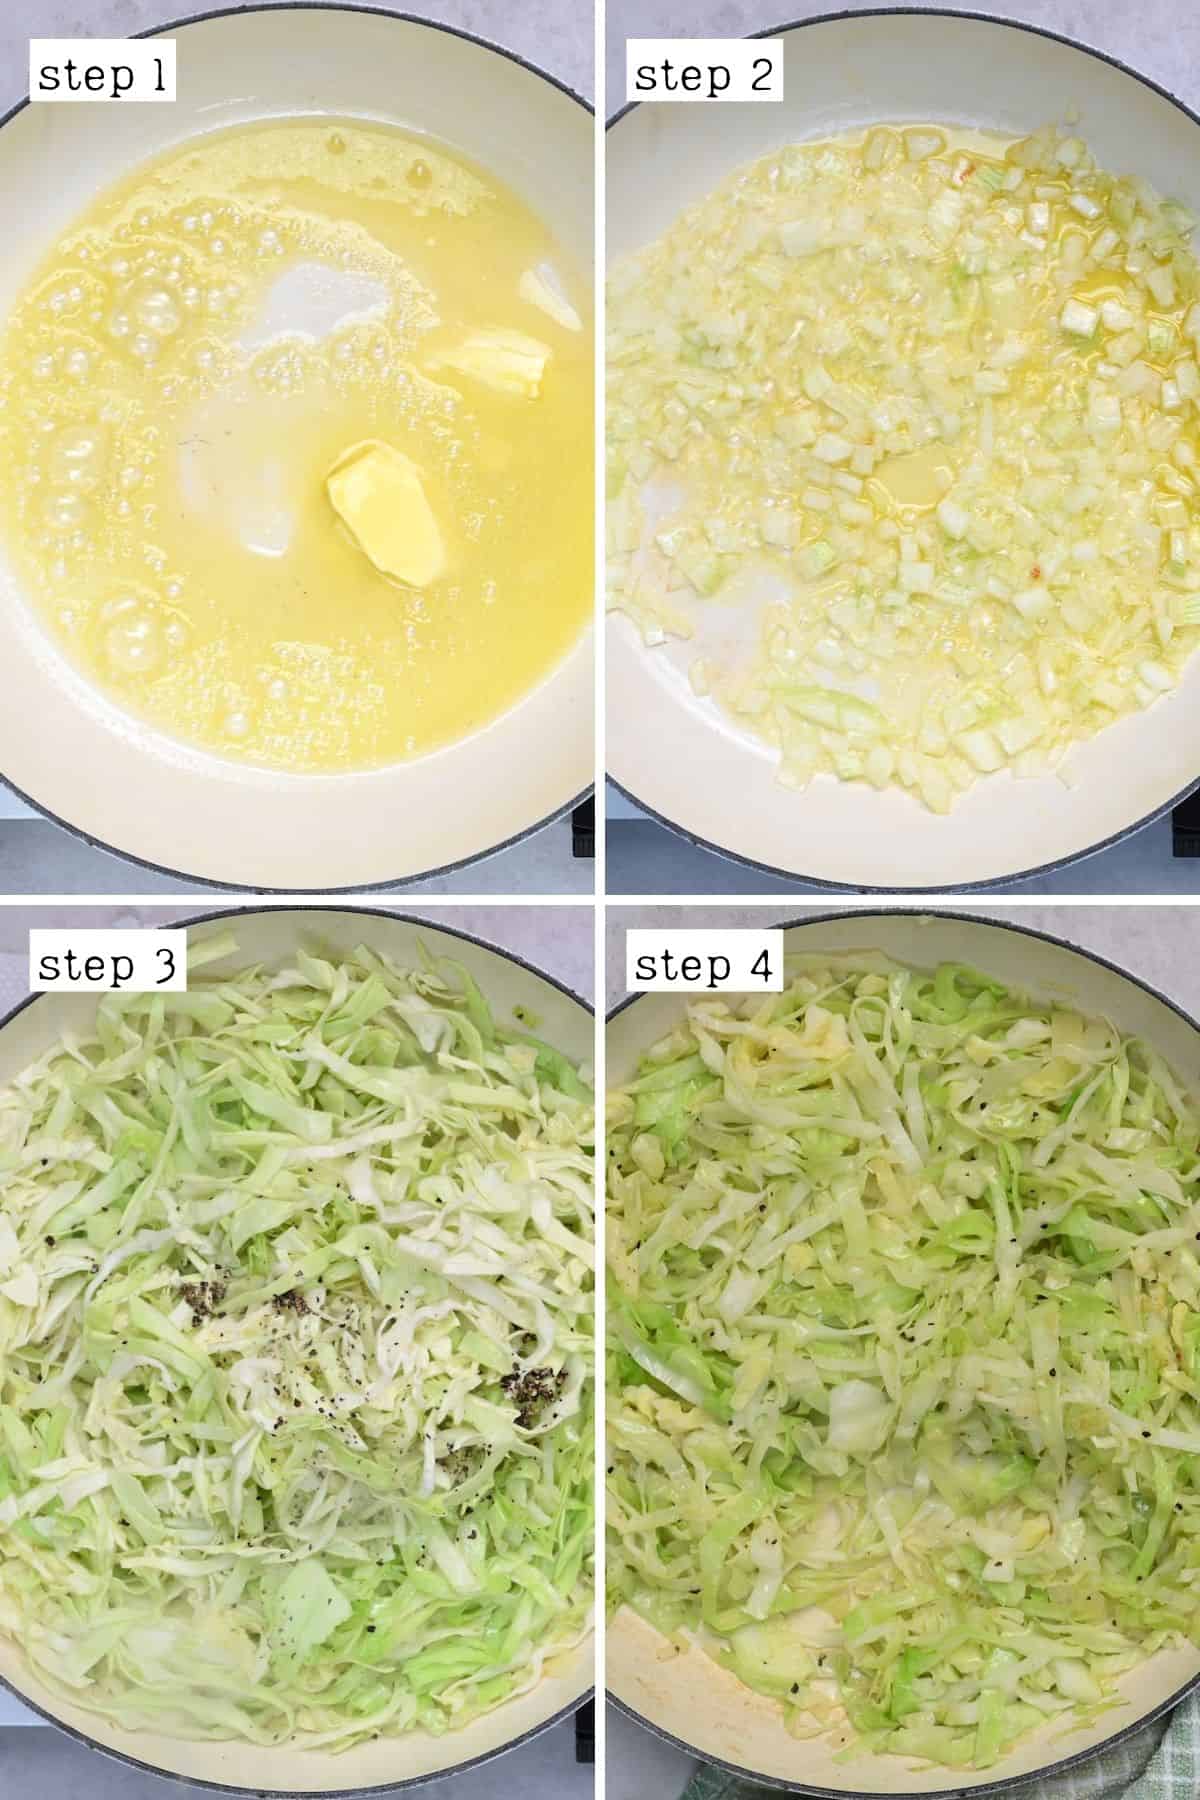 Steps for precooking cabbage